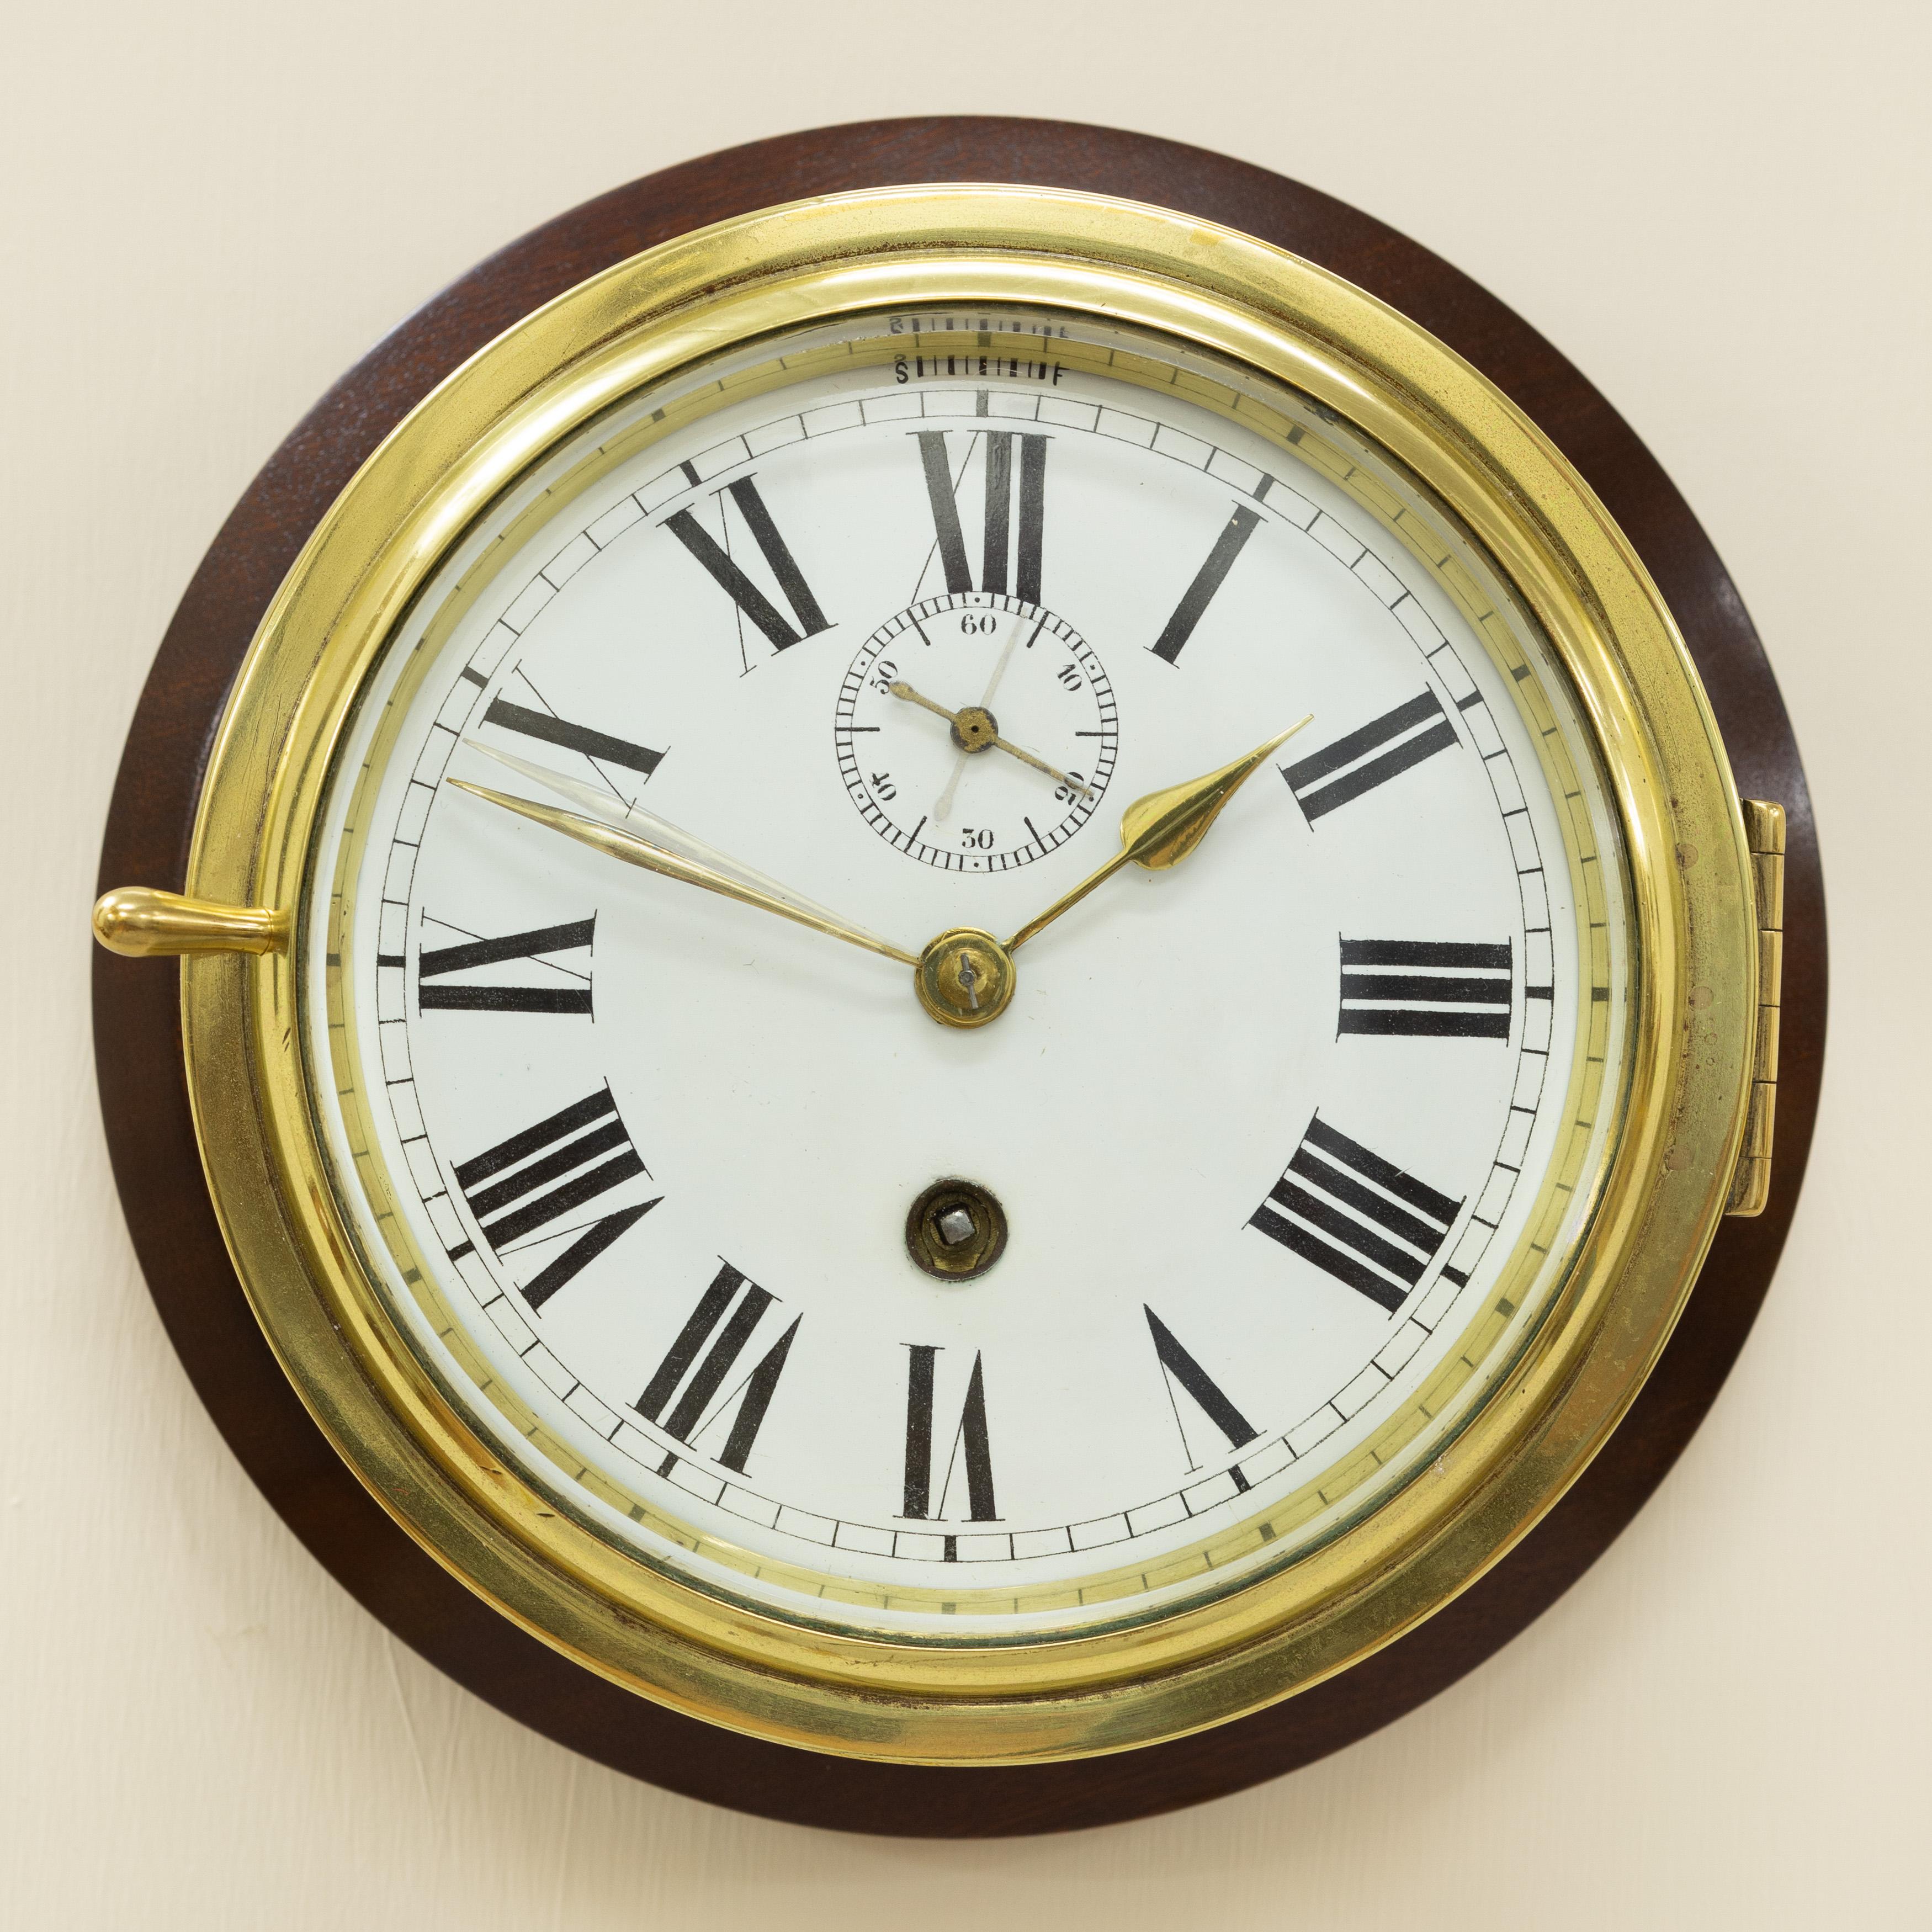 Victorian ships clock



Victorian ships clock with heavy cast brass bezel with bevelled glass opening to the enamel dial with Roman numerals, original hands and subsidiary dial for seconds below the XII.


Eight day spring driven movement